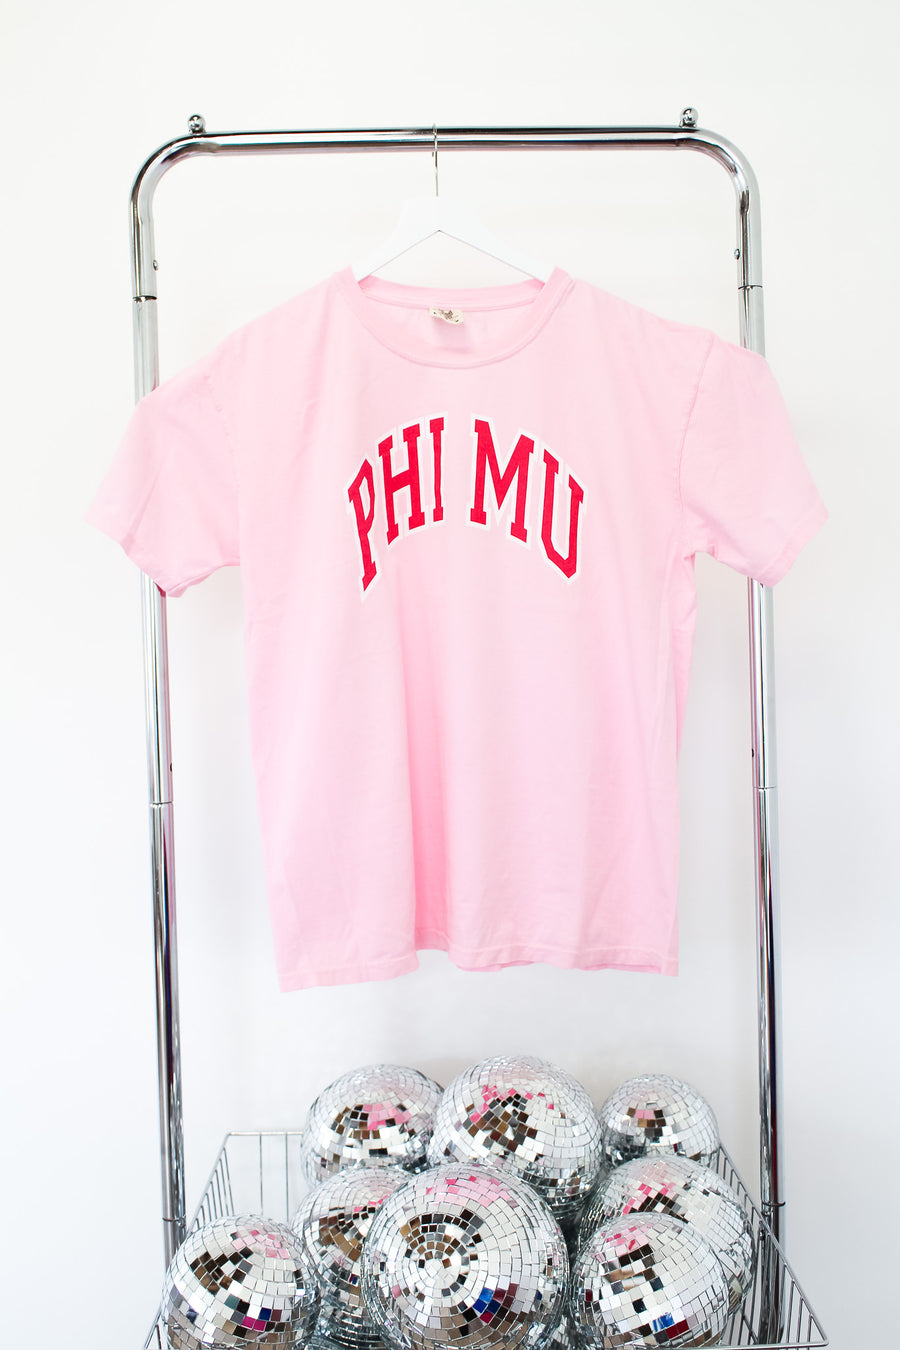 Phi Mu Spellout Tee - LG COTTON CANDY